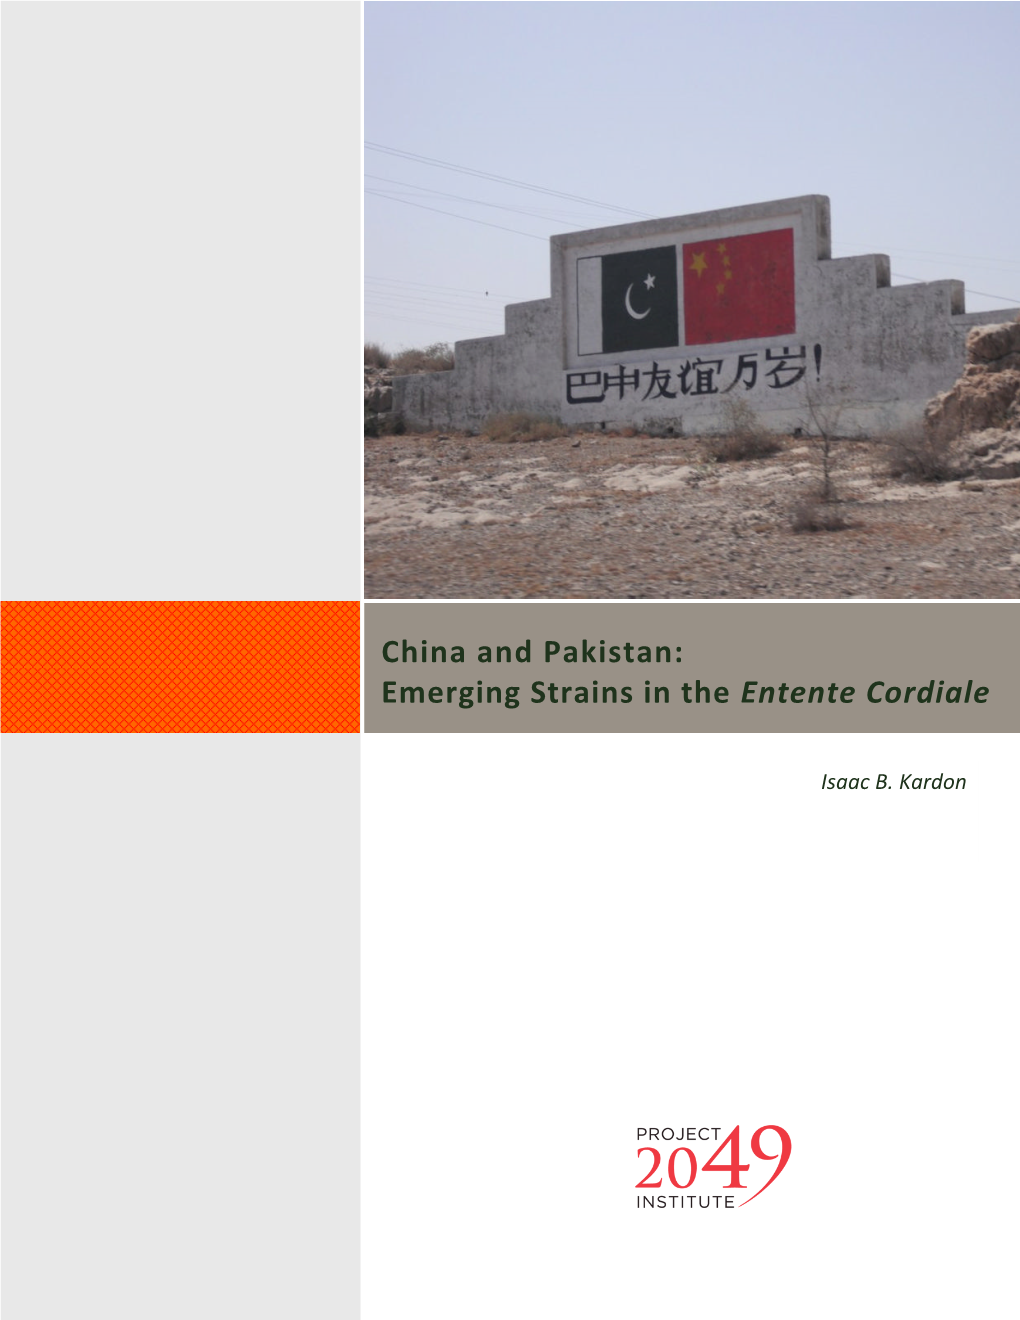 China and Pakistan: Emerging Strains in the Entente Cordiale